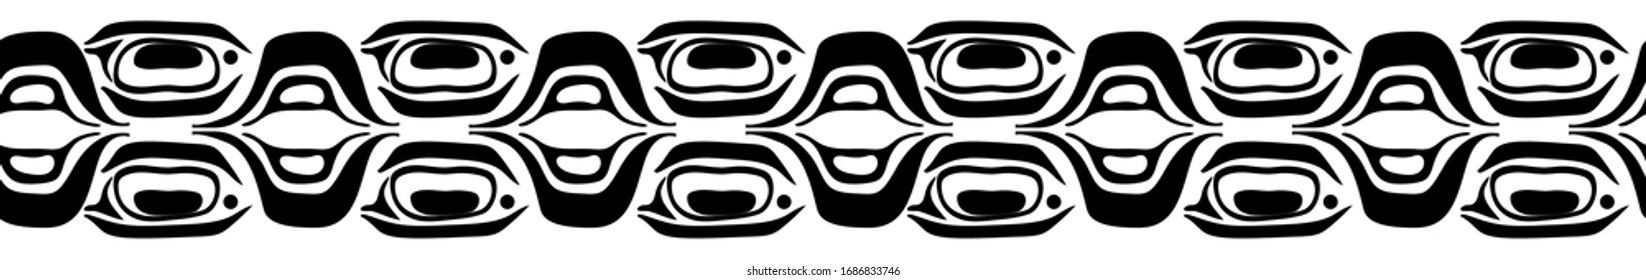 265 Northwest native american pattern Images, Stock Photos & Vectors ...